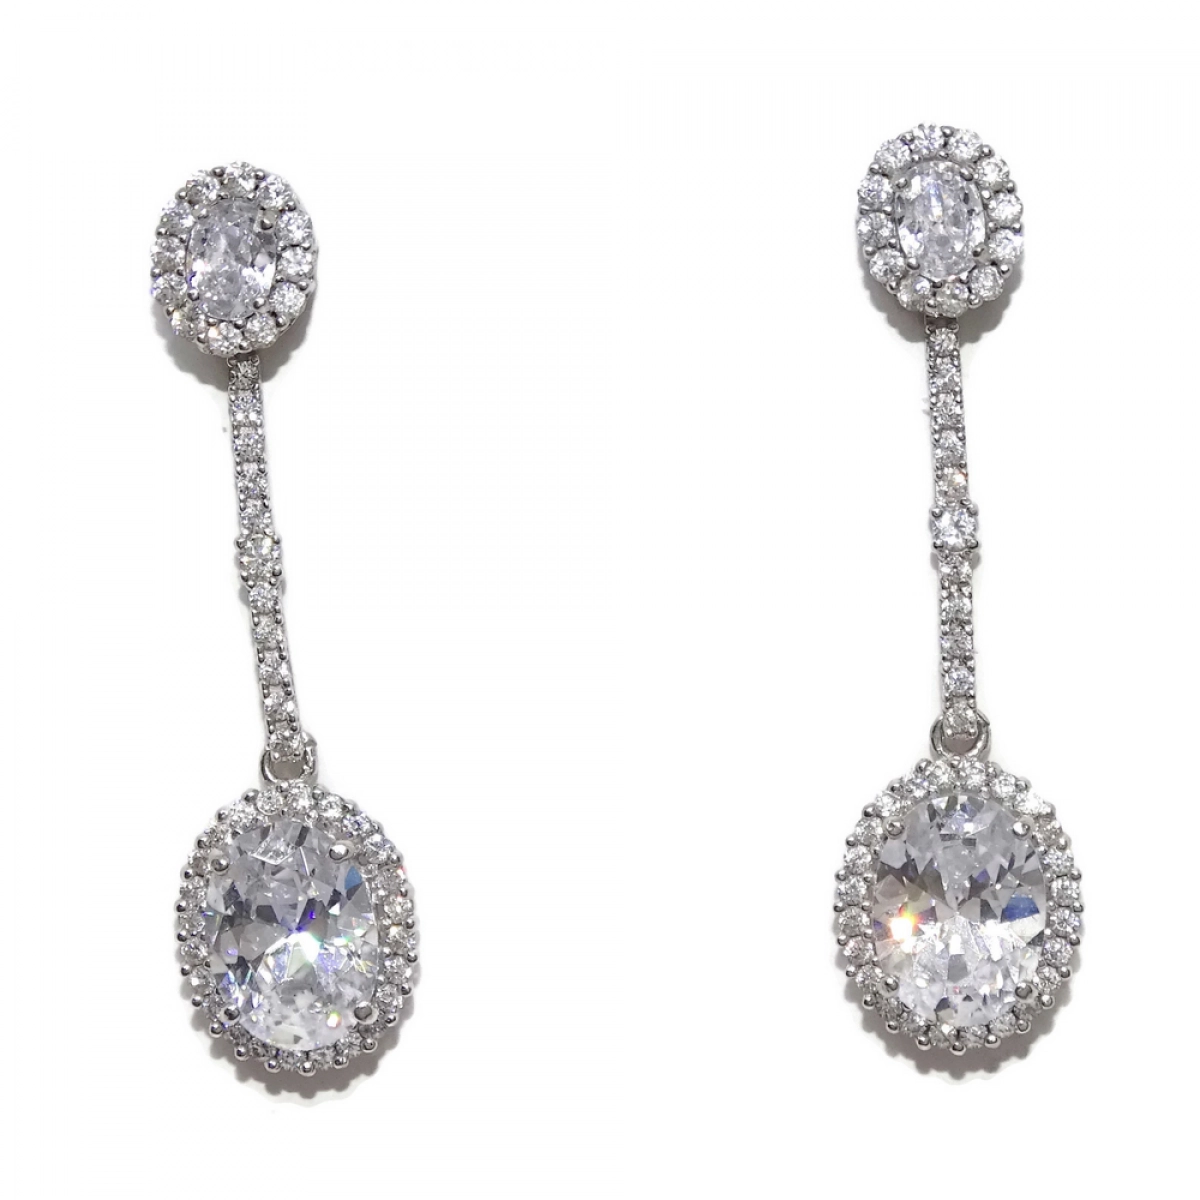 GOLD EARRINGS WHITE DETACHABLE WITH ZIRCONS 18K GOLD, LENGTH 3.10 CM CLOSURE PRESSURE, NEVER SAY NEVER